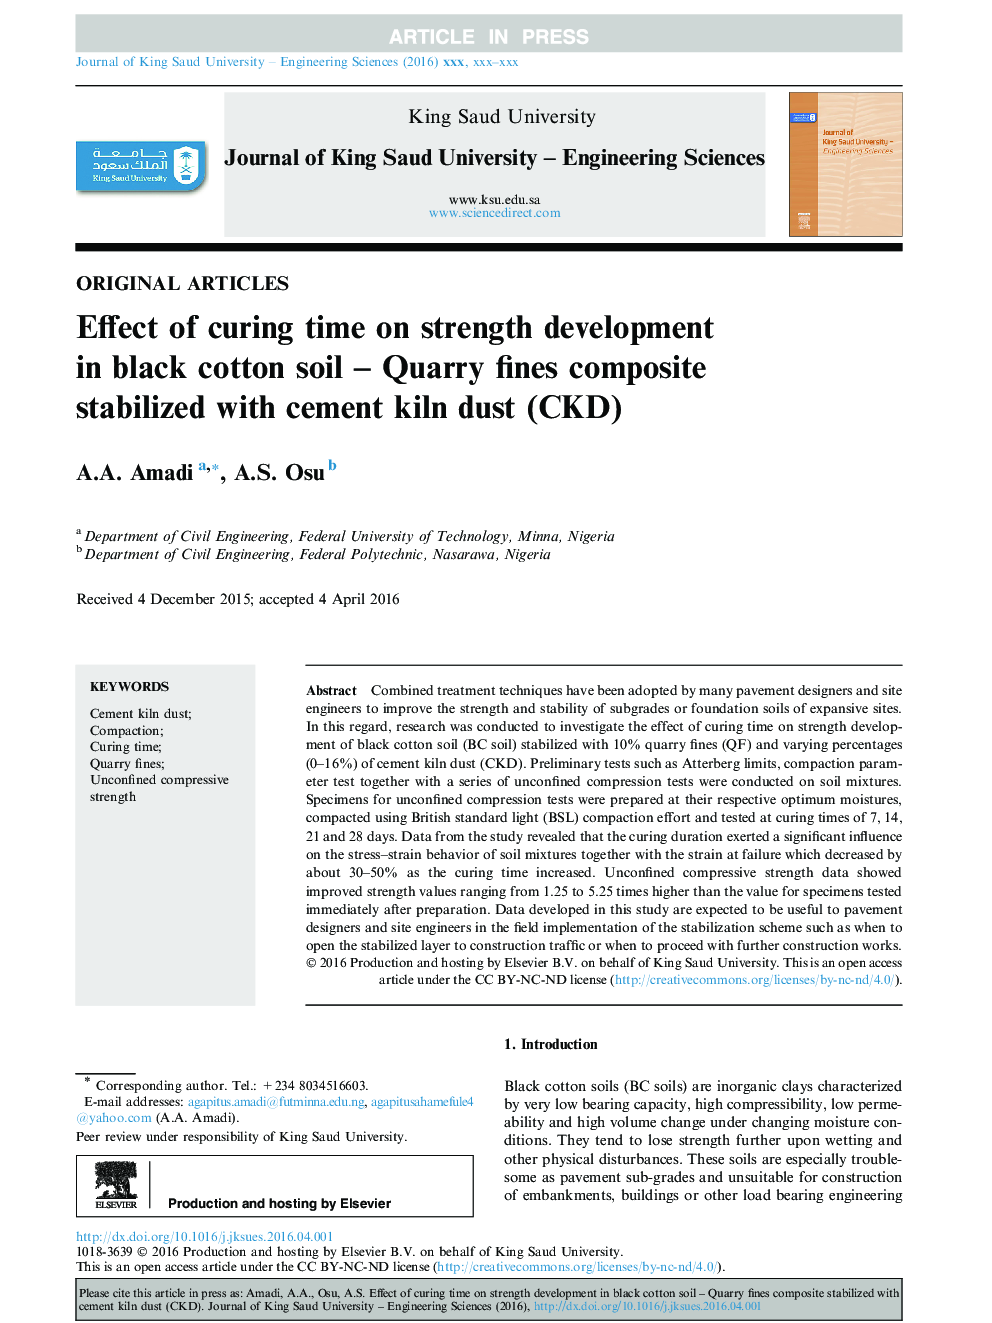 Effect of curing time on strength development in black cotton soil - Quarry fines composite stabilized with cement kiln dust (CKD)